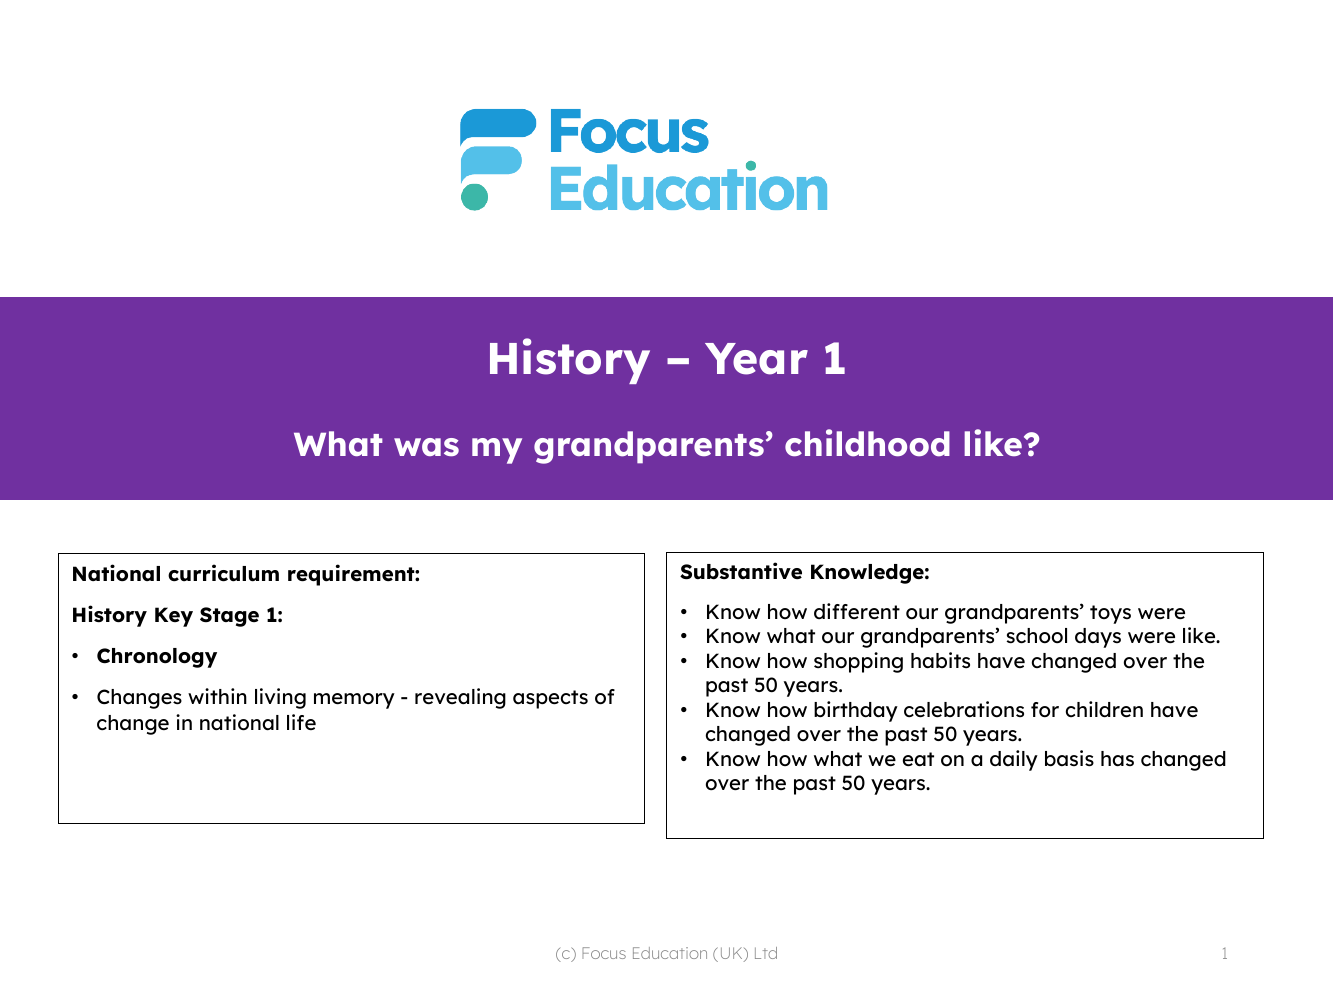 How different were the toys that our grandparents' played with? - Presentation